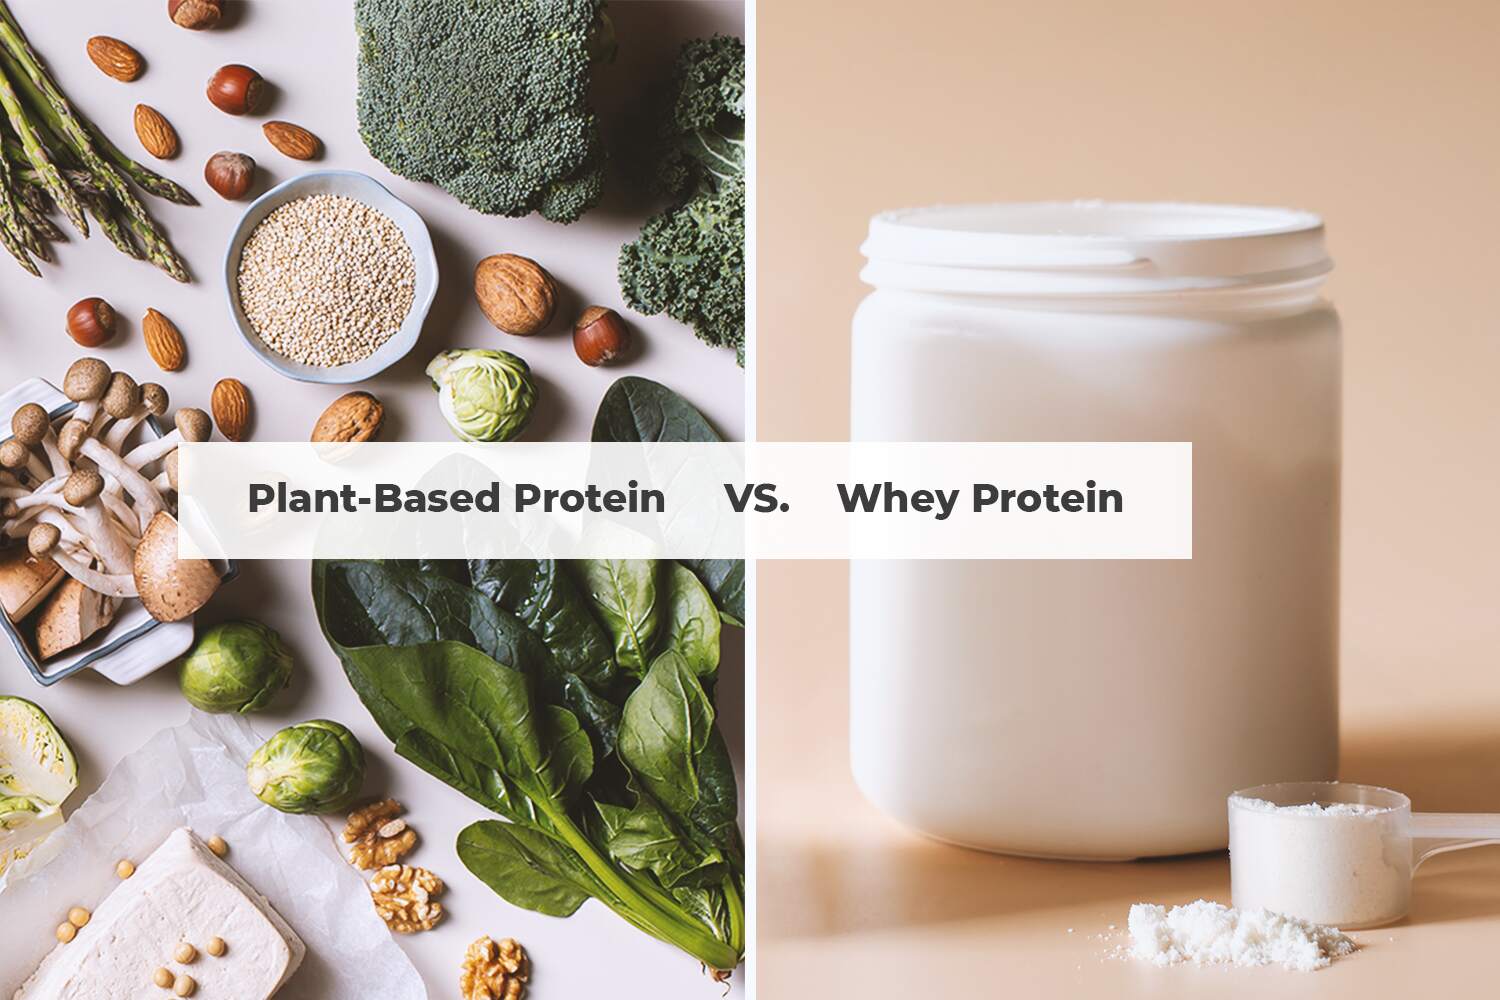 Whey Protein vs. Plant-Based Protein: Which Is Better? (Tips For Buying)